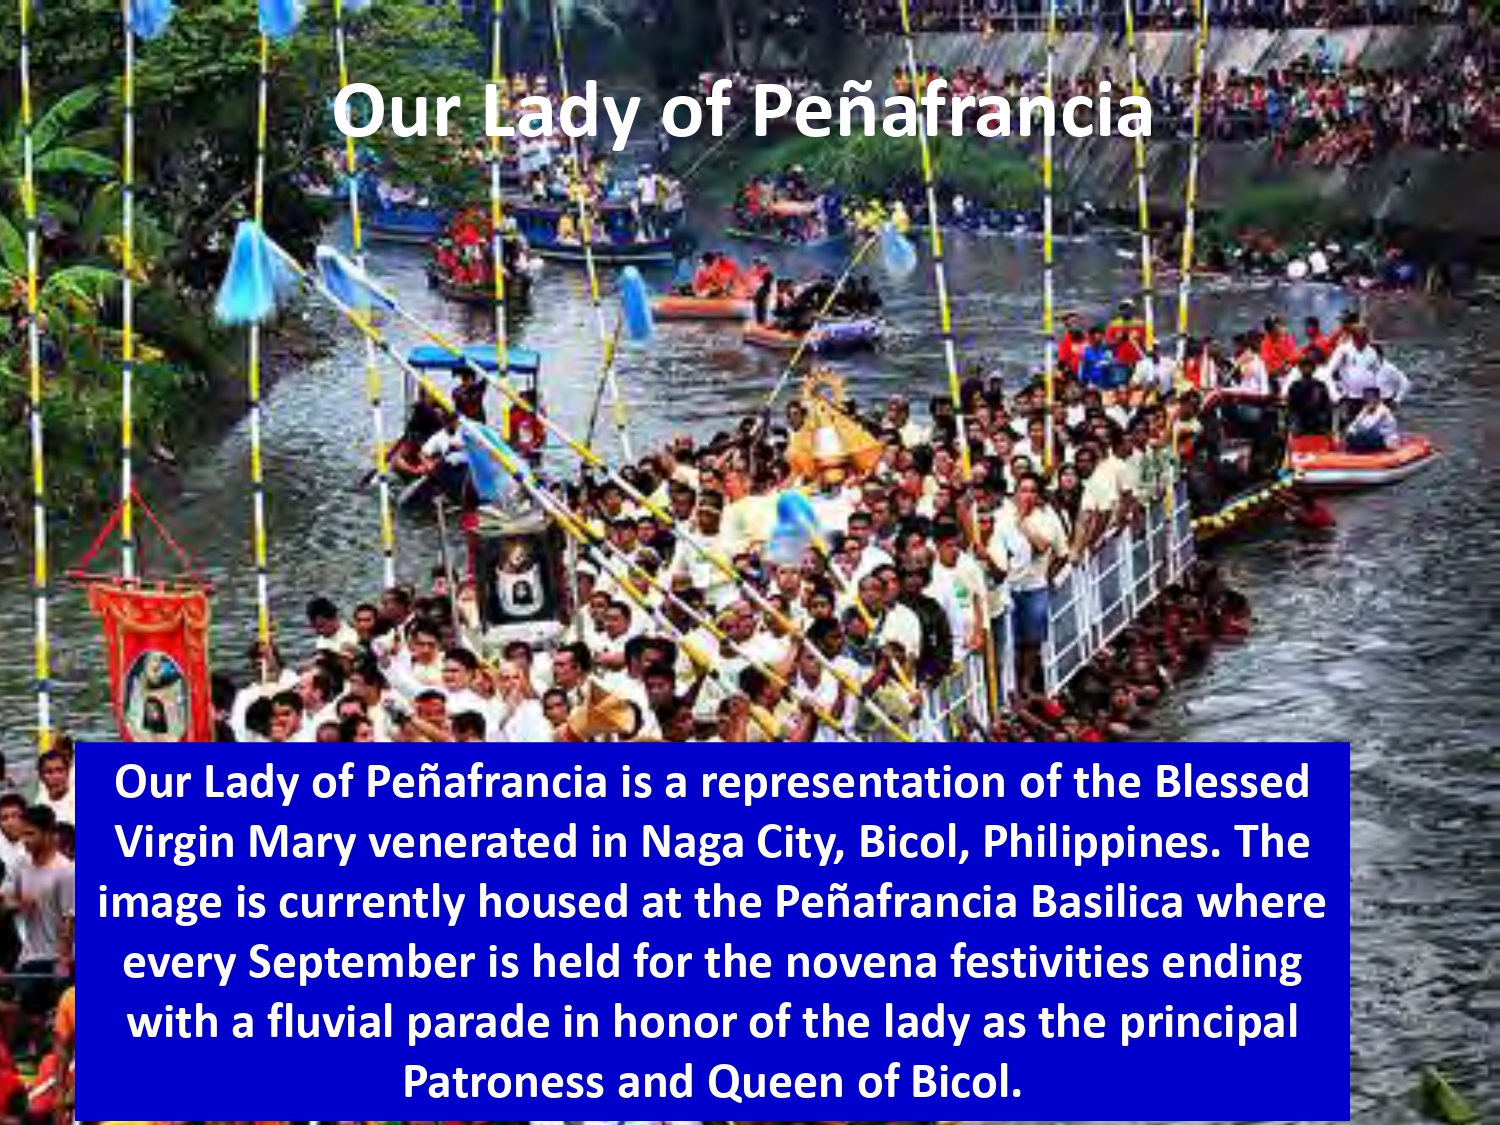 Our Lady of Peñafrancia is a representation of the Blessed Virgin Mary venerated in Naga City, Bicol, Philippines. The image is currently housed at the Peñafrancia Basilica where every September is held for the novena festivities ending with a fluvial parade in honor of the lady as the principal Patroness and Queen of Bicol.